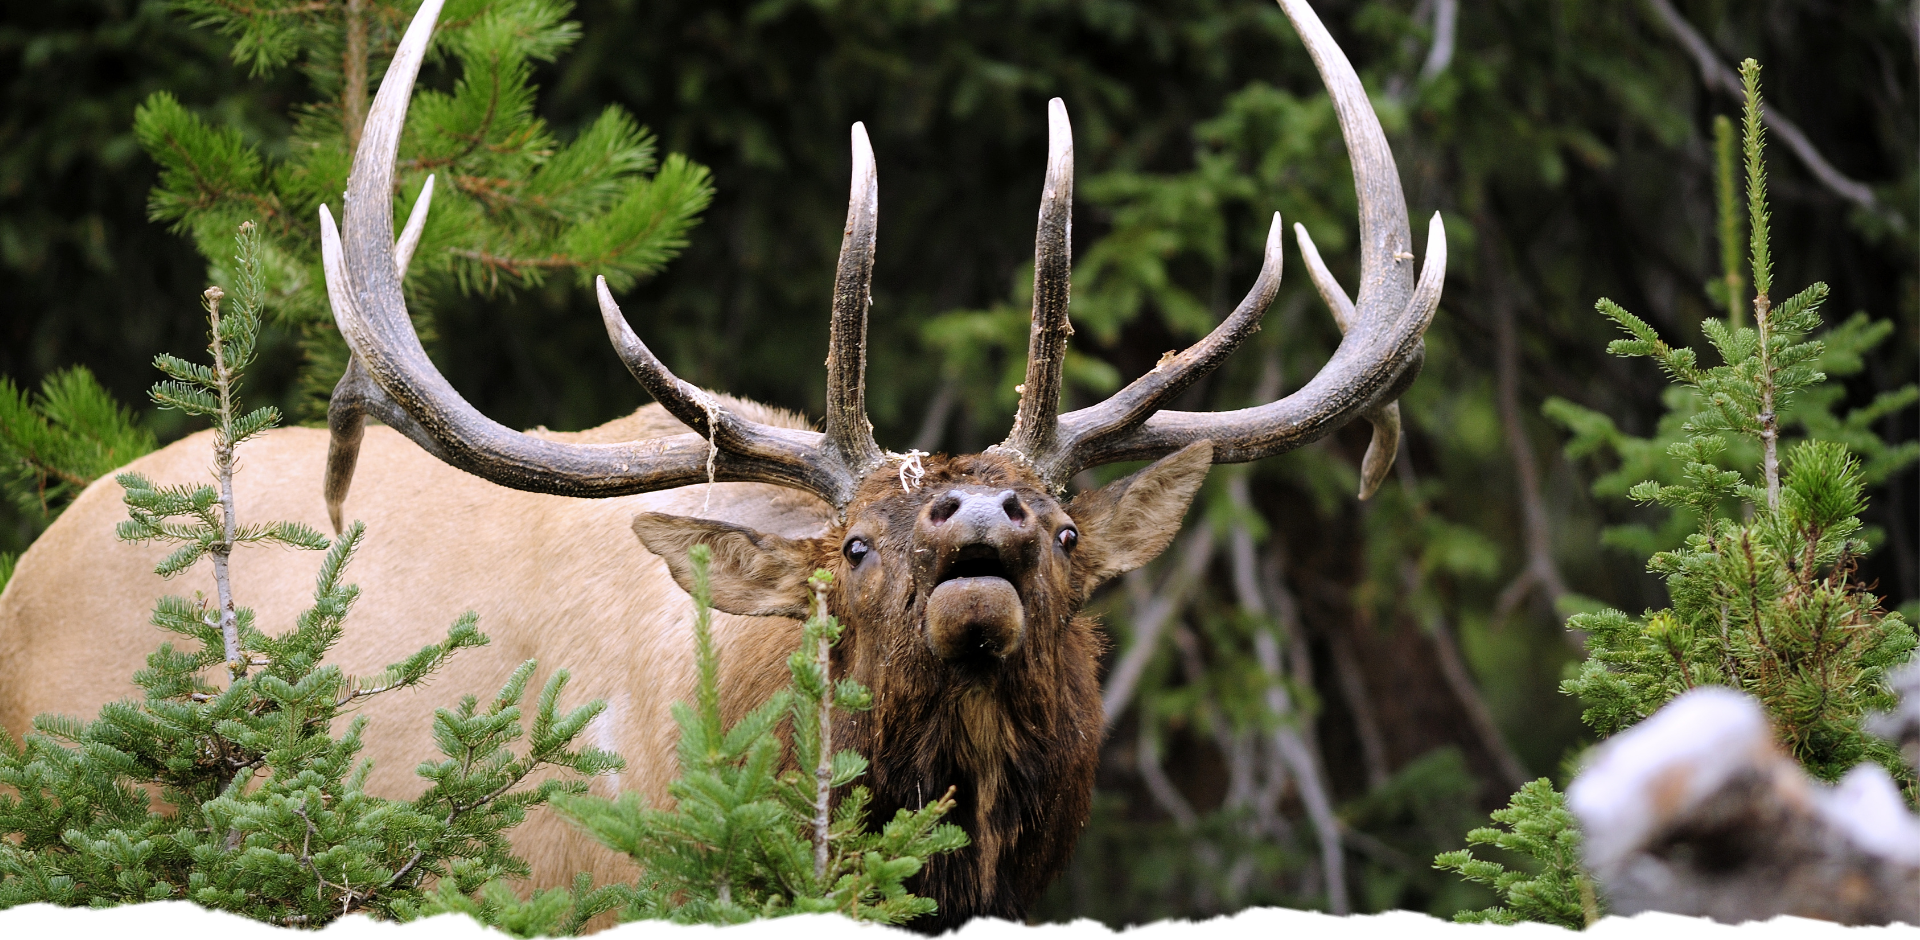 An elk with large antlers in the woods